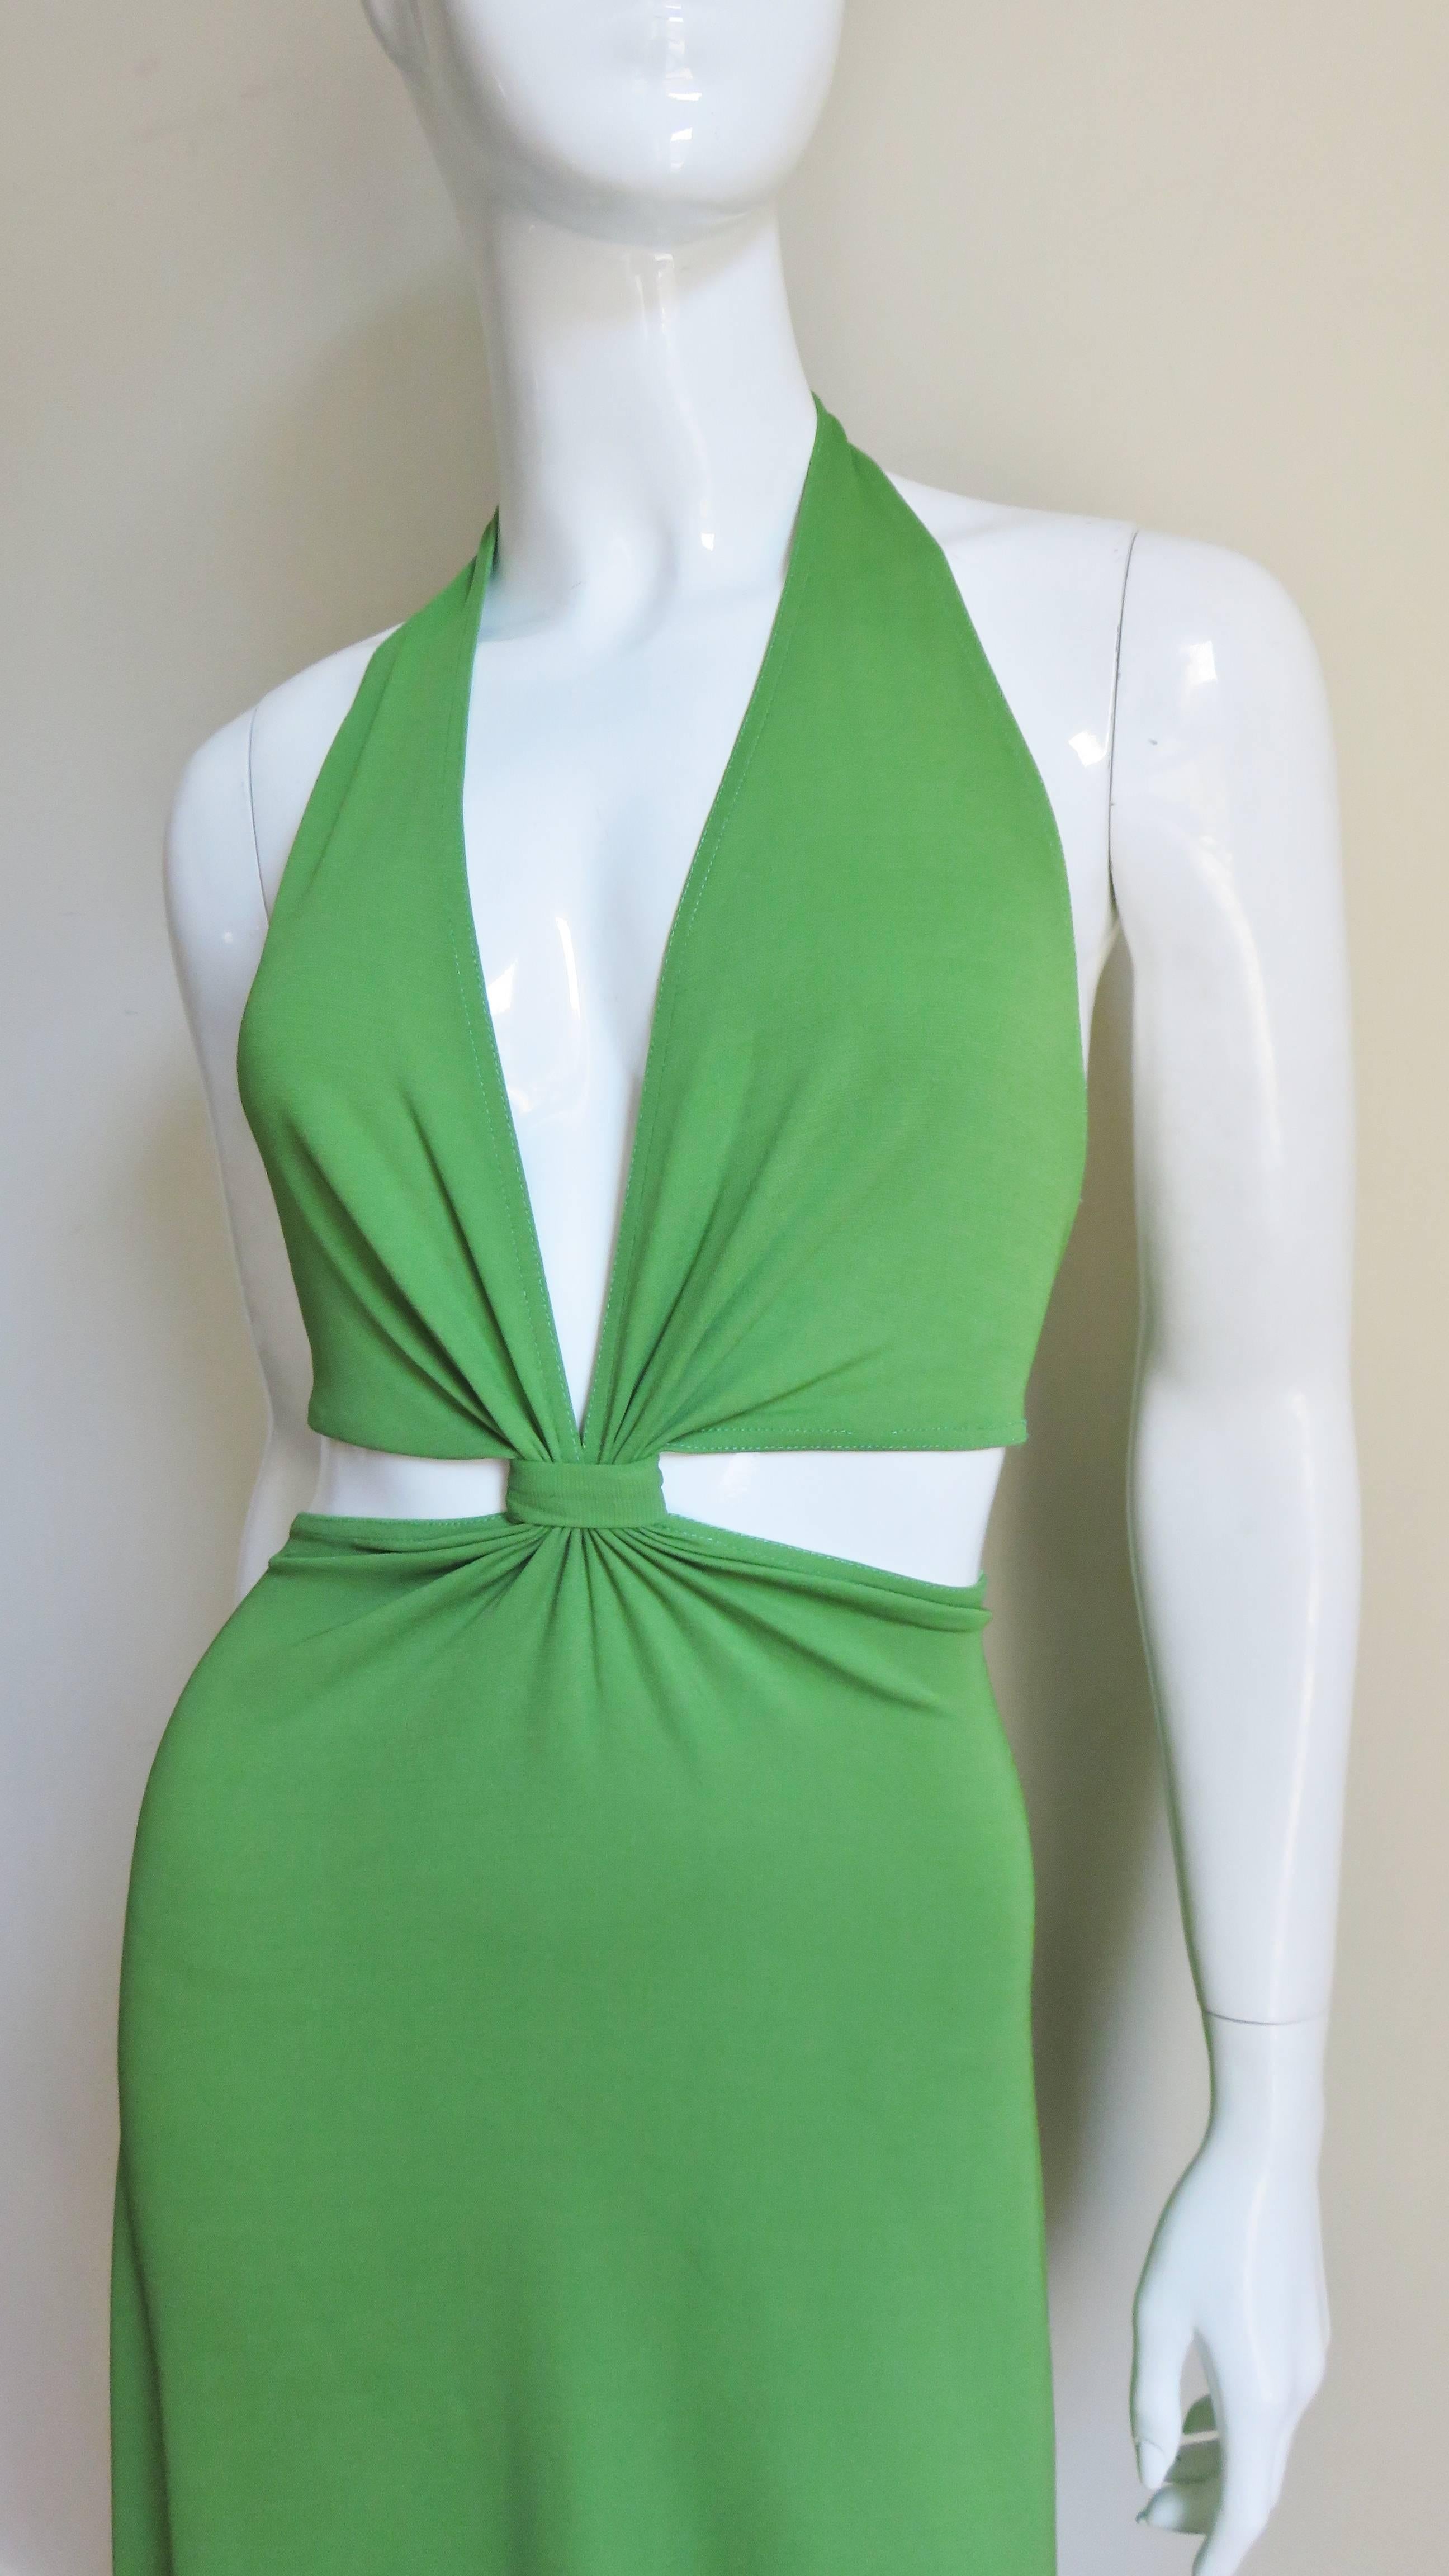 A fabulous bright green silk jersey dress from Celine. It has a halter style top with a plunging front and bare in the back with the exception of a strap across the center closing with a metal clasp. The skirt forms from the gathered center front of